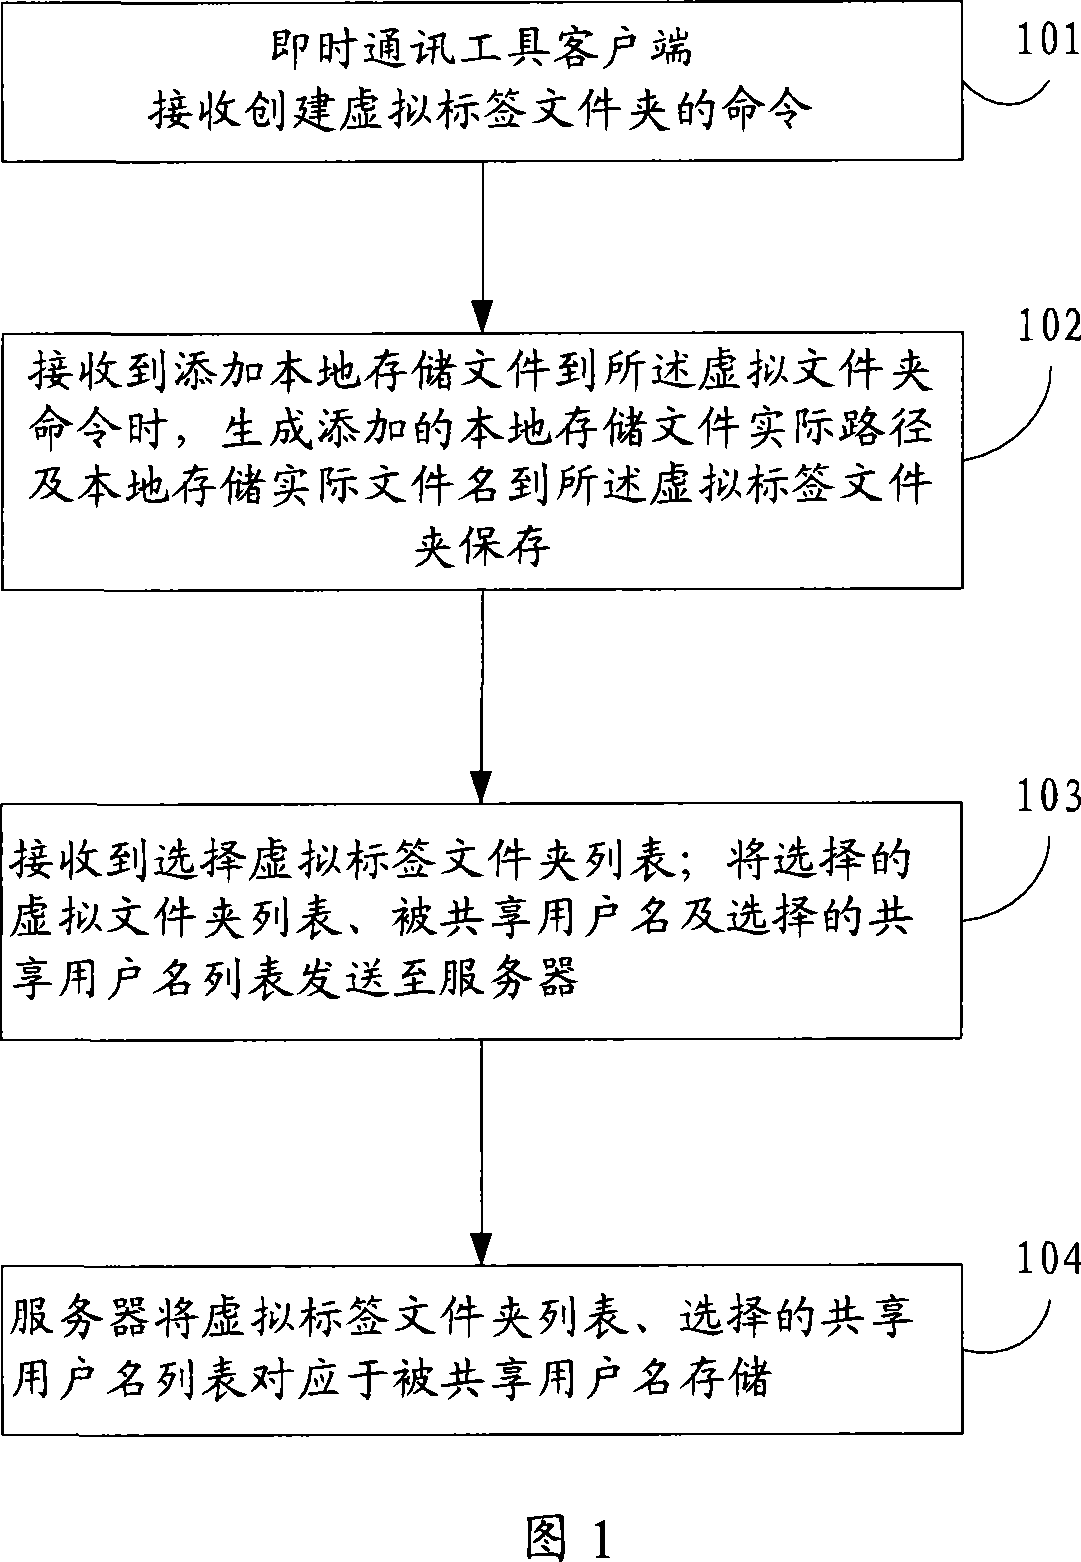 Method for creating virtual label file, sharing and download file